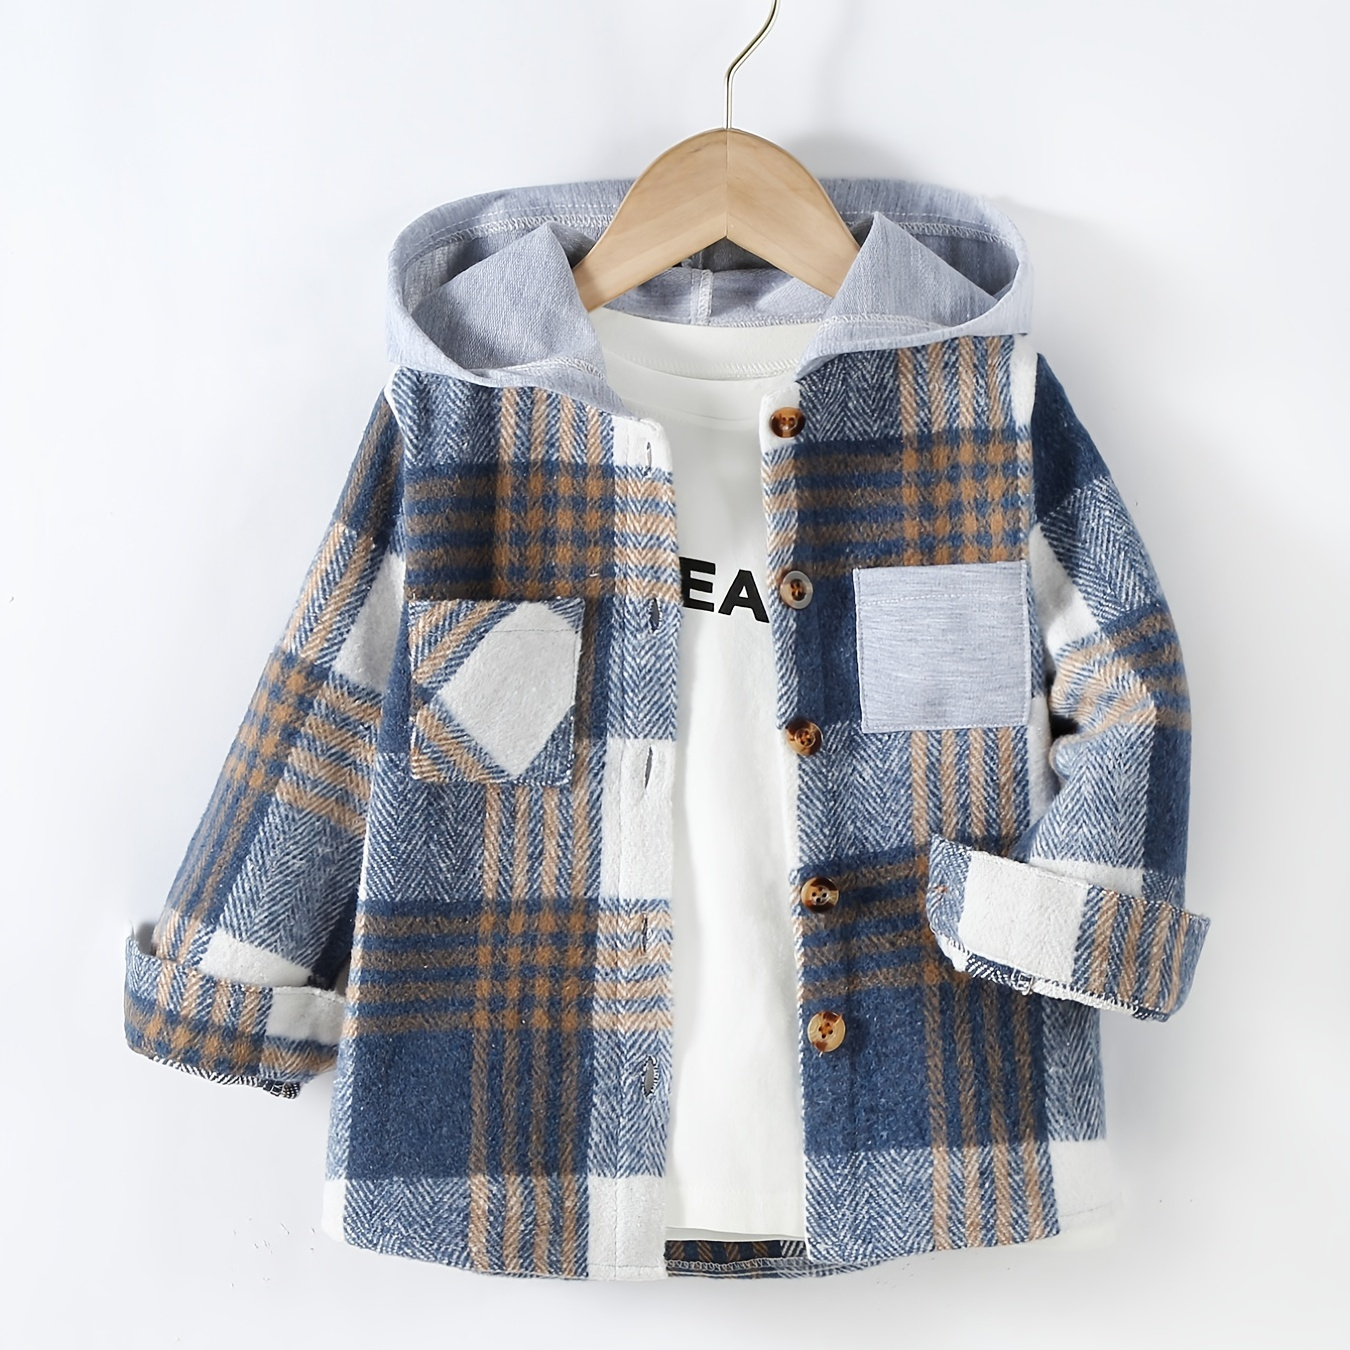 

Toddle Kids Boy Jacket Long Sleeve Plaid Coat Tops Casual Button Down Hoodie Shirts